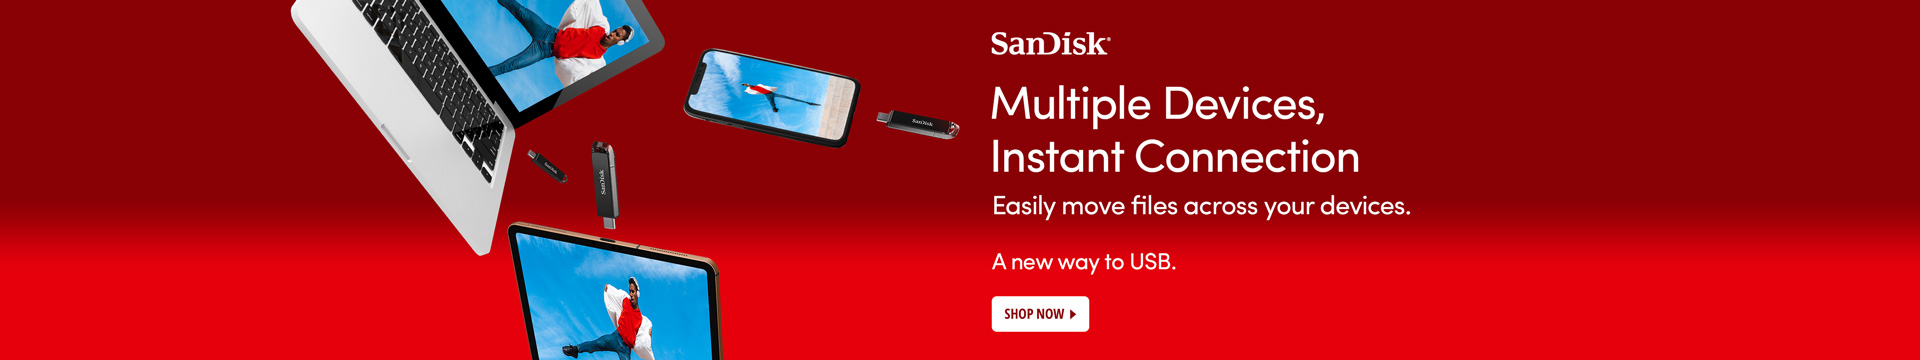 SanDisk multiple devices, instant connection